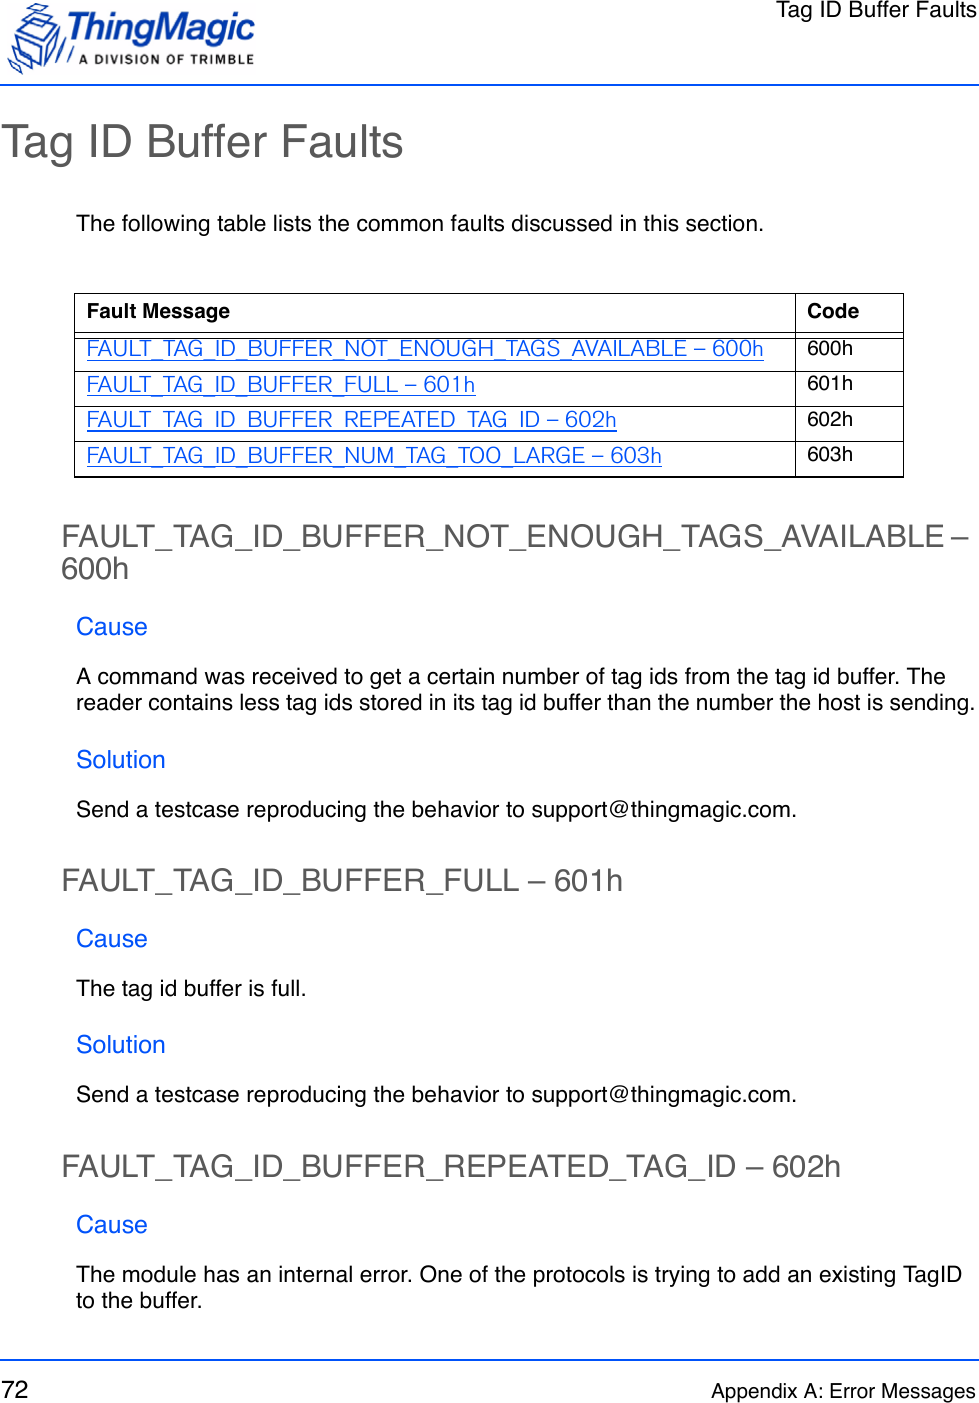 Tag ID Buffer Faults72 Appendix A: Error MessagesTag ID Buffer FaultsThe following table lists the common faults discussed in this section.FAULT_TAG_ID_BUFFER_NOT_ENOUGH_TAGS_AVAILABLE – 600hCauseA command was received to get a certain number of tag ids from the tag id buffer. The reader contains less tag ids stored in its tag id buffer than the number the host is sending.SolutionSend a testcase reproducing the behavior to support@thingmagic.com.FAULT_TAG_ID_BUFFER_FULL – 601hCauseThe tag id buffer is full.SolutionSend a testcase reproducing the behavior to support@thingmagic.com.FAULT_TAG_ID_BUFFER_REPEATED_TAG_ID – 602hCauseThe module has an internal error. One of the protocols is trying to add an existing TagID to the buffer.Fault Message CodeFAULT_TAG_ID_BUFFER_NOT_ENOUGH_TAGS_AVAILABLE – 600h 600hFAULT_TAG_ID_BUFFER_FULL – 601h 601hFAULT_TAG_ID_BUFFER_REPEATED_TAG_ID – 602h 602hFAULT_TAG_ID_BUFFER_NUM_TAG_TOO_LARGE – 603h 603h